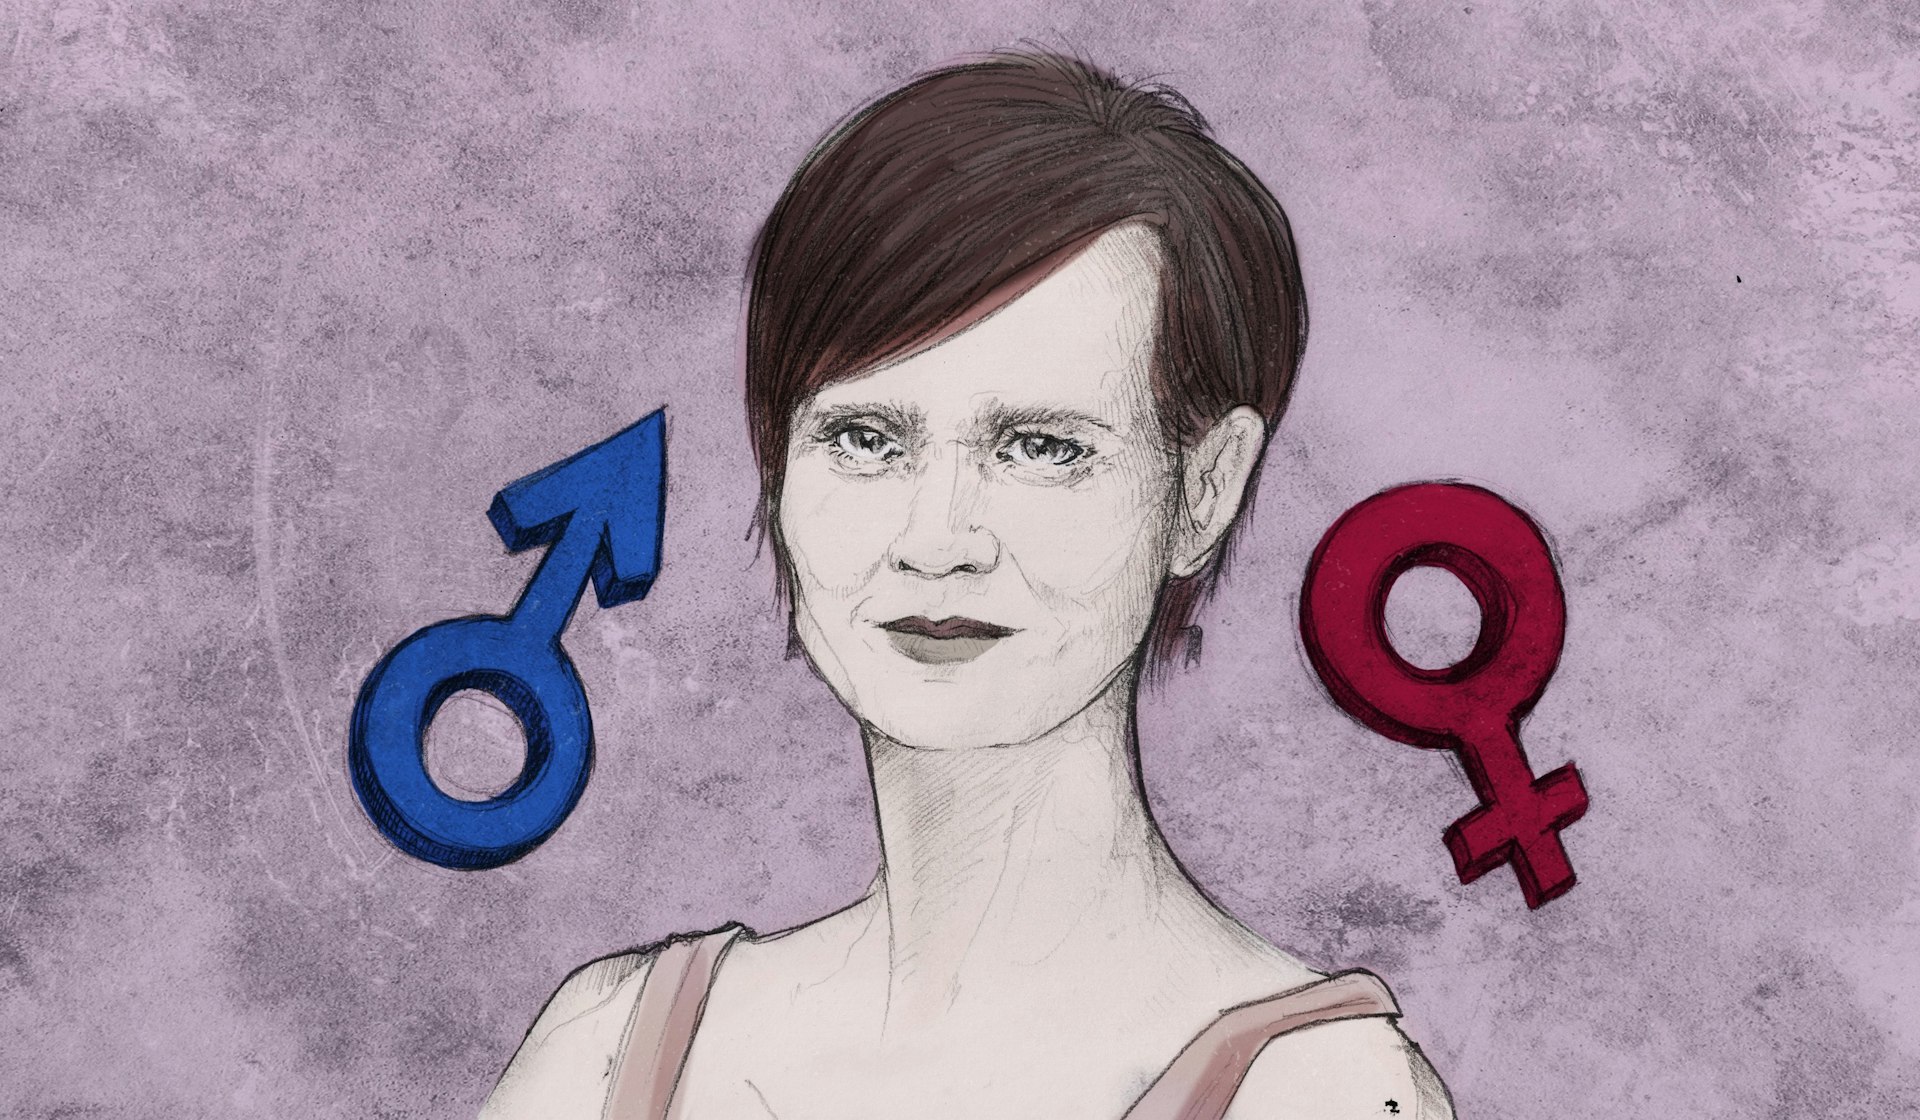 Revisiting Cynthia Nixon’s contentious views on sexuality